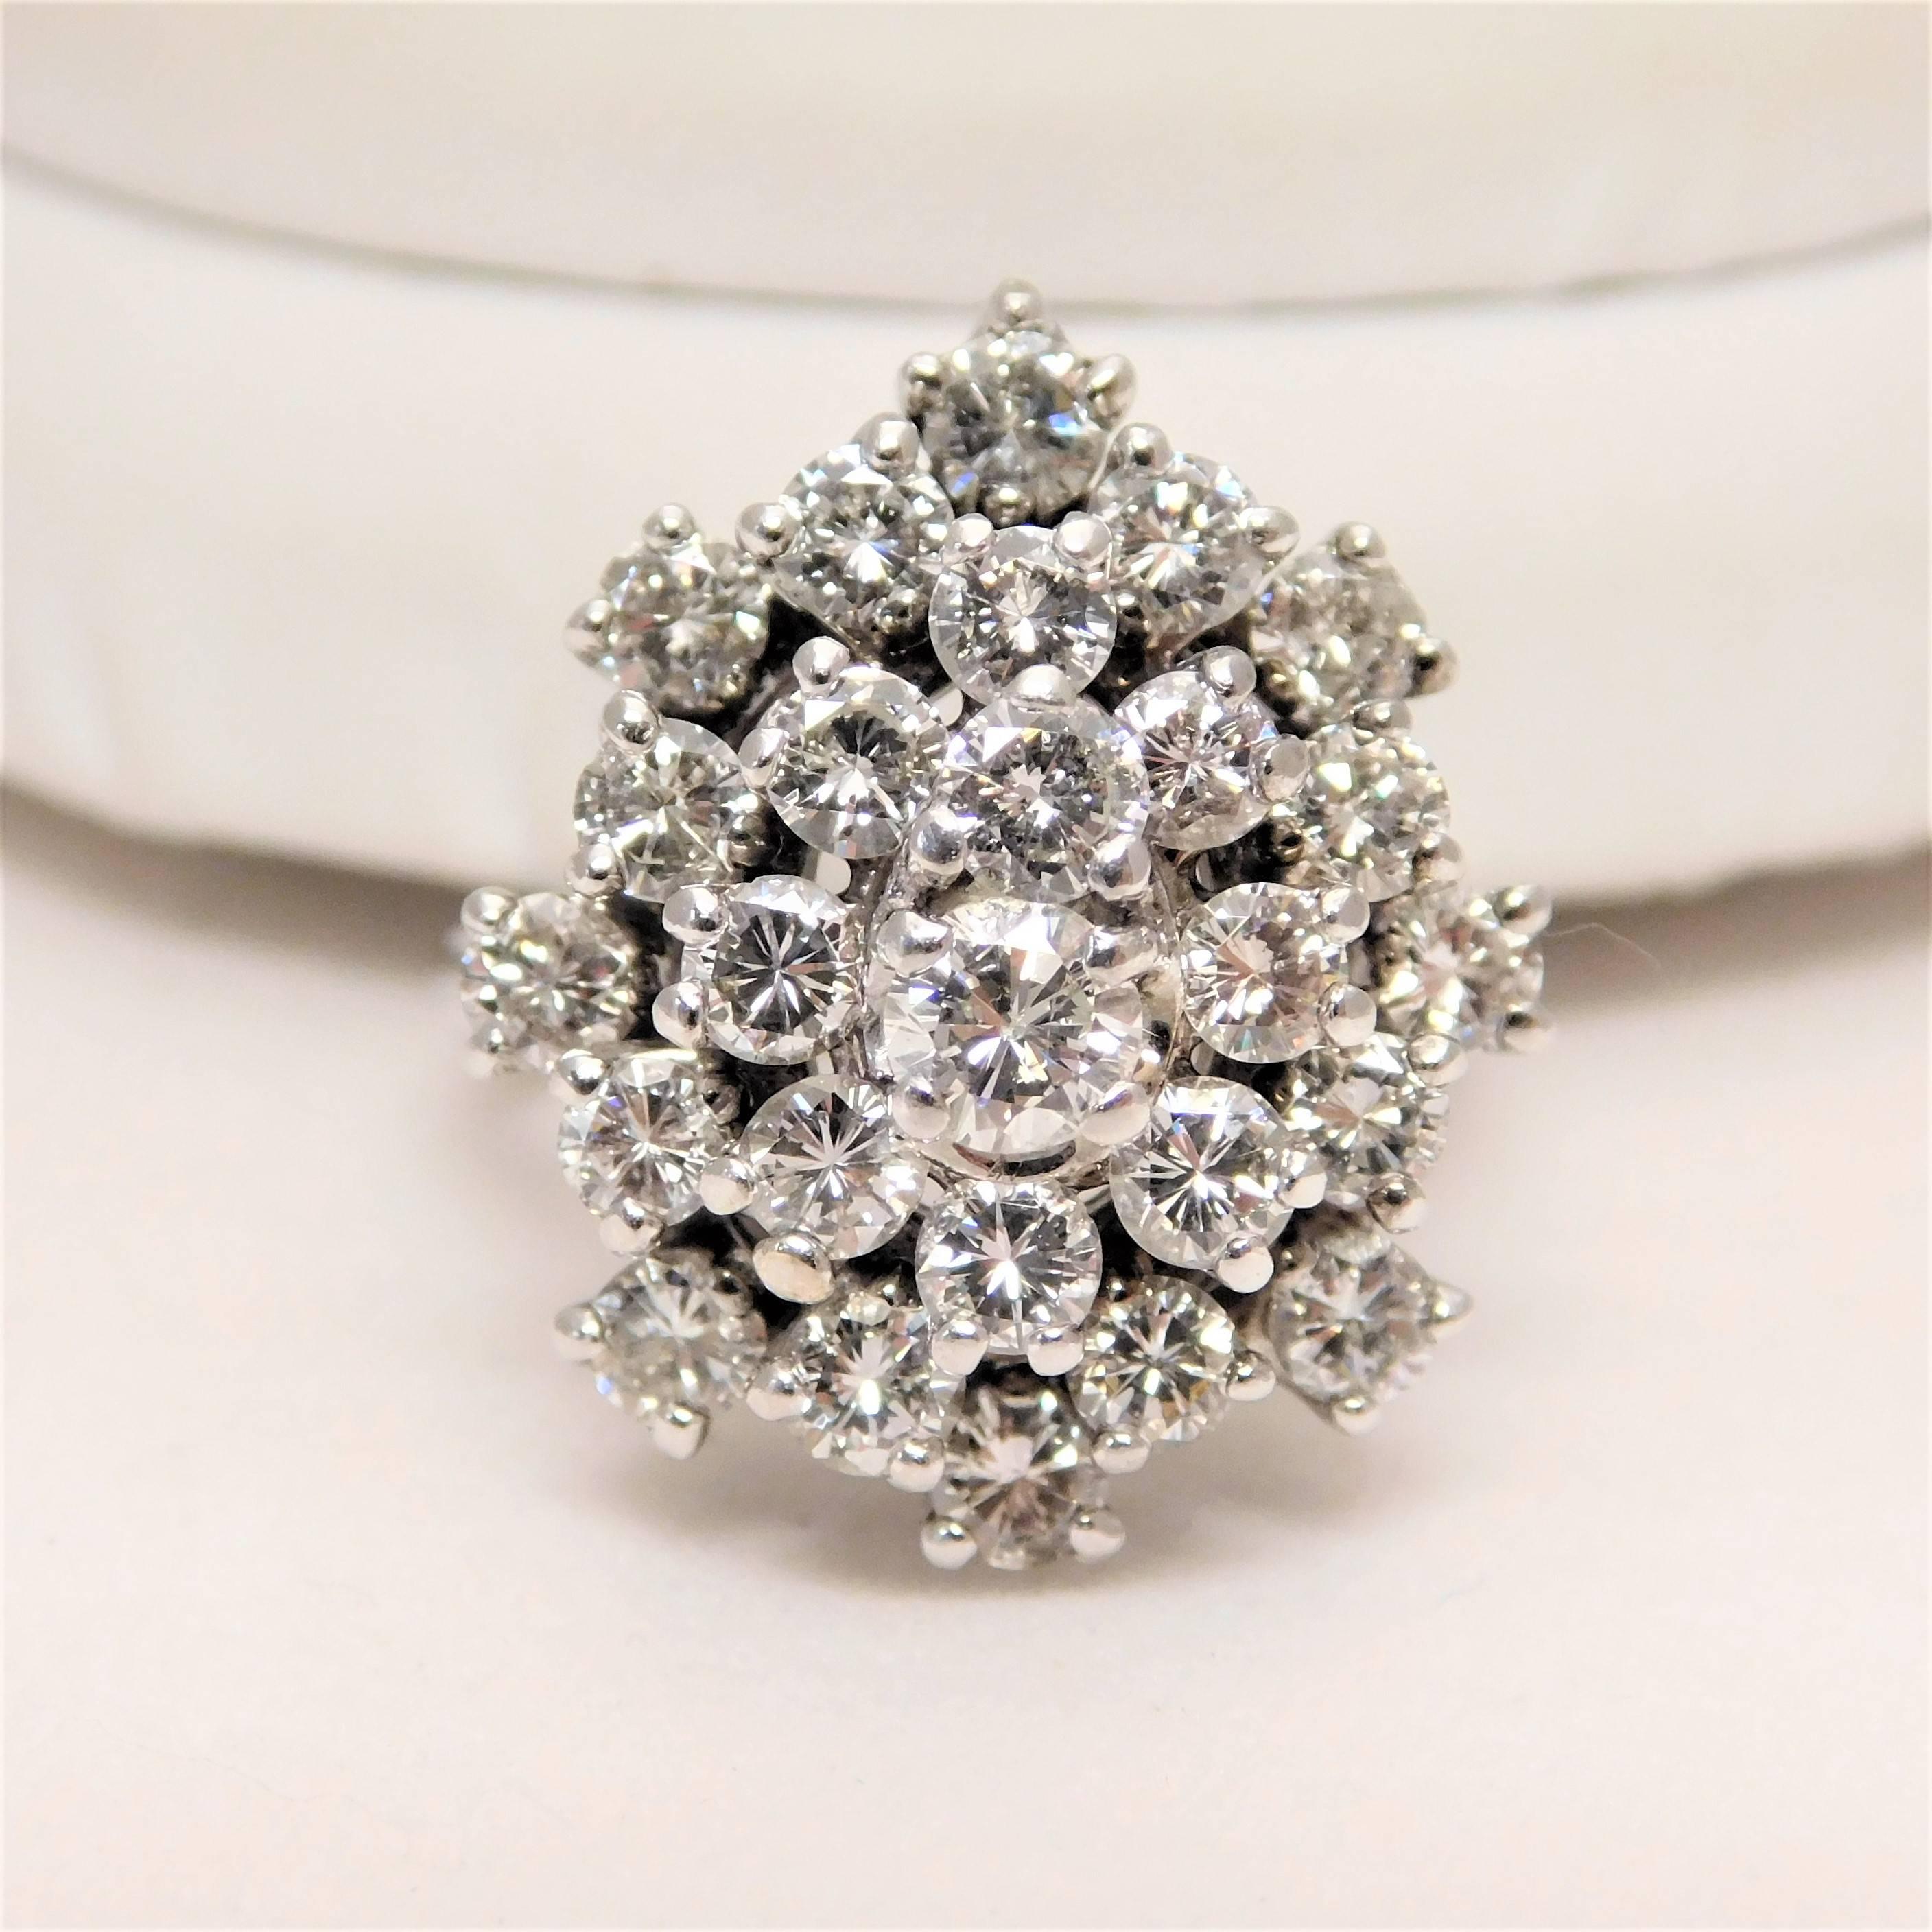 Elegant Vintage 14k White Gold Diamond Cluster Ring

From a gorgeous New Orleans estate.  Circa 1970’s.  This impressive snowflake cluster-style ring is made of solid 14kt white gold.  Restored to its original immaculate condition, it is ornately